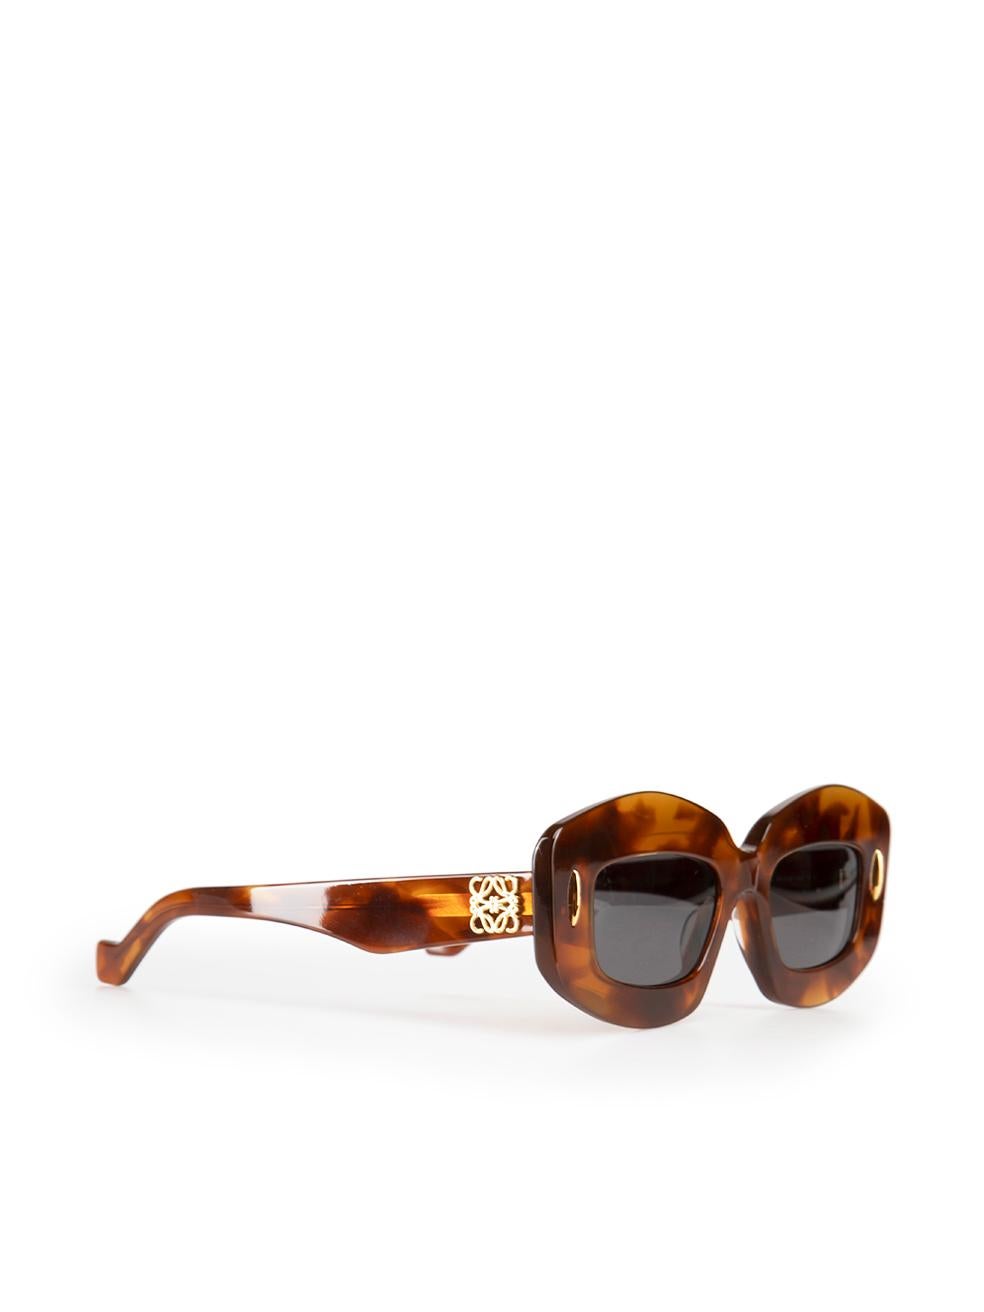 CONDITION is Very good. Minimal wear to sunglasses is evident. Minimal wear to the arms with very light scratches on this used Loewe designer resale item. These sunglasses come with original case.

Details
Brown
Plastic
Sunglasses
Tortoiseshell